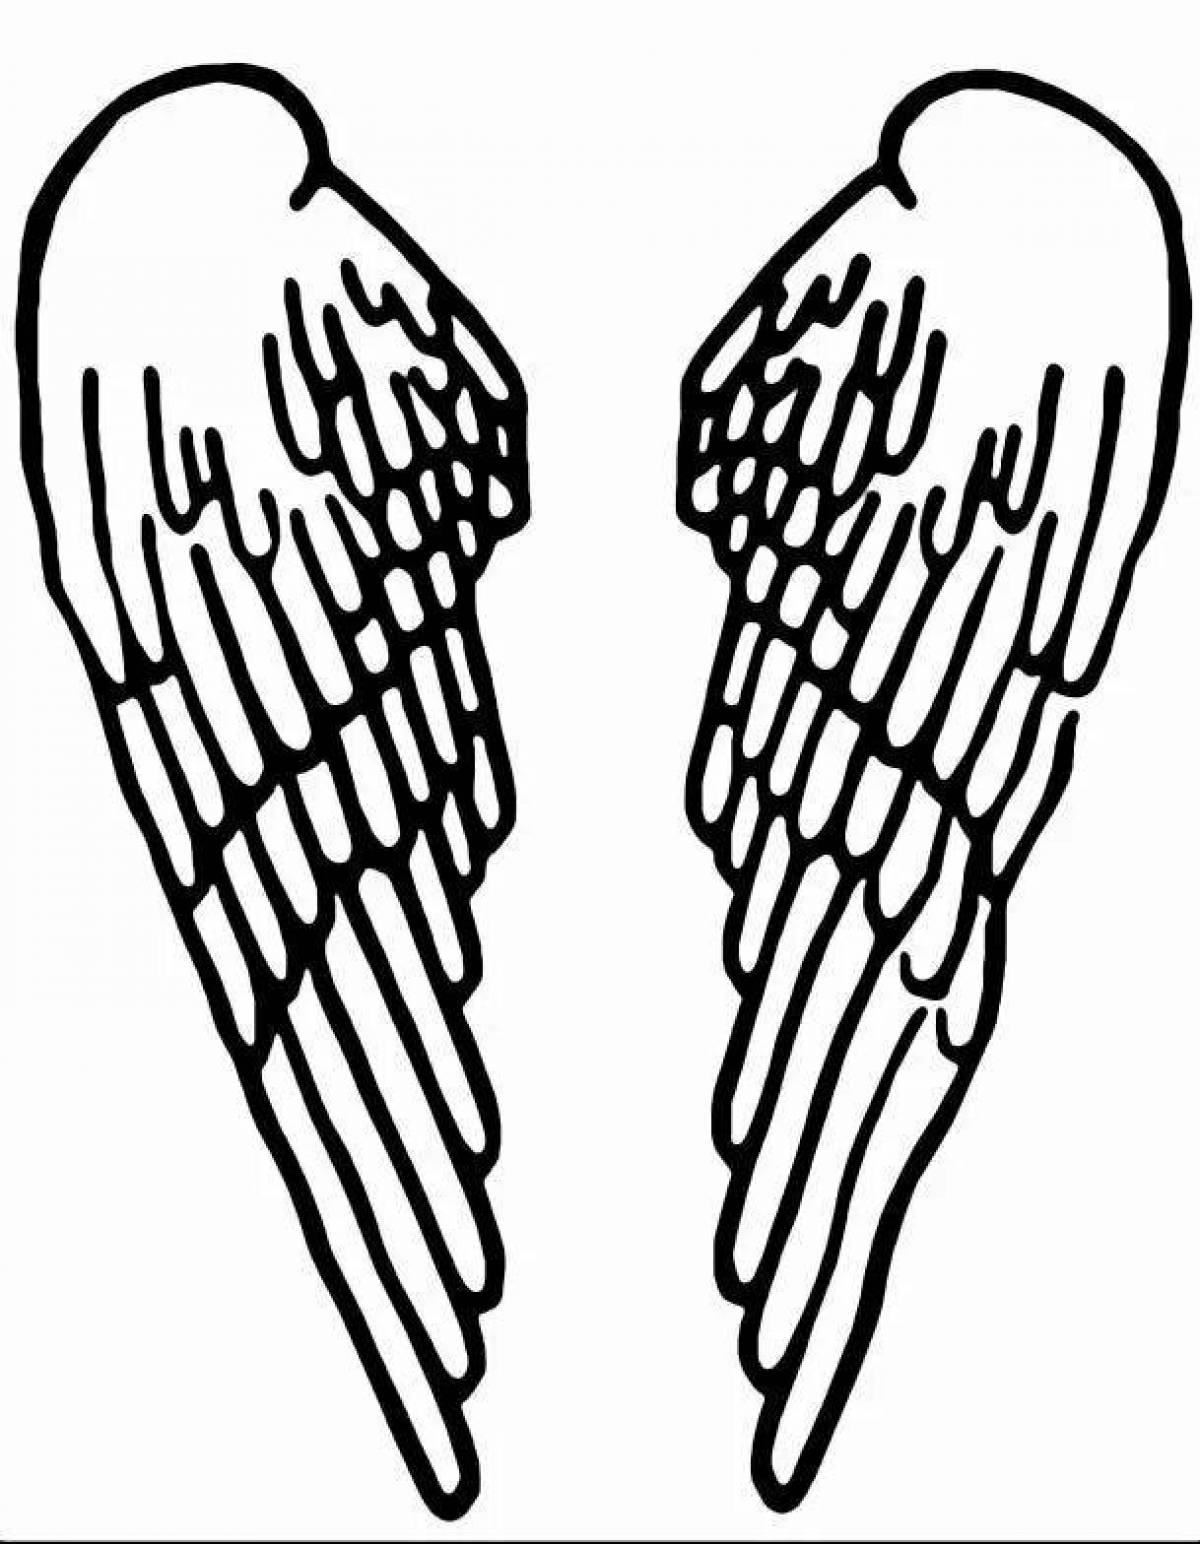 Adorable angel wings coloring page